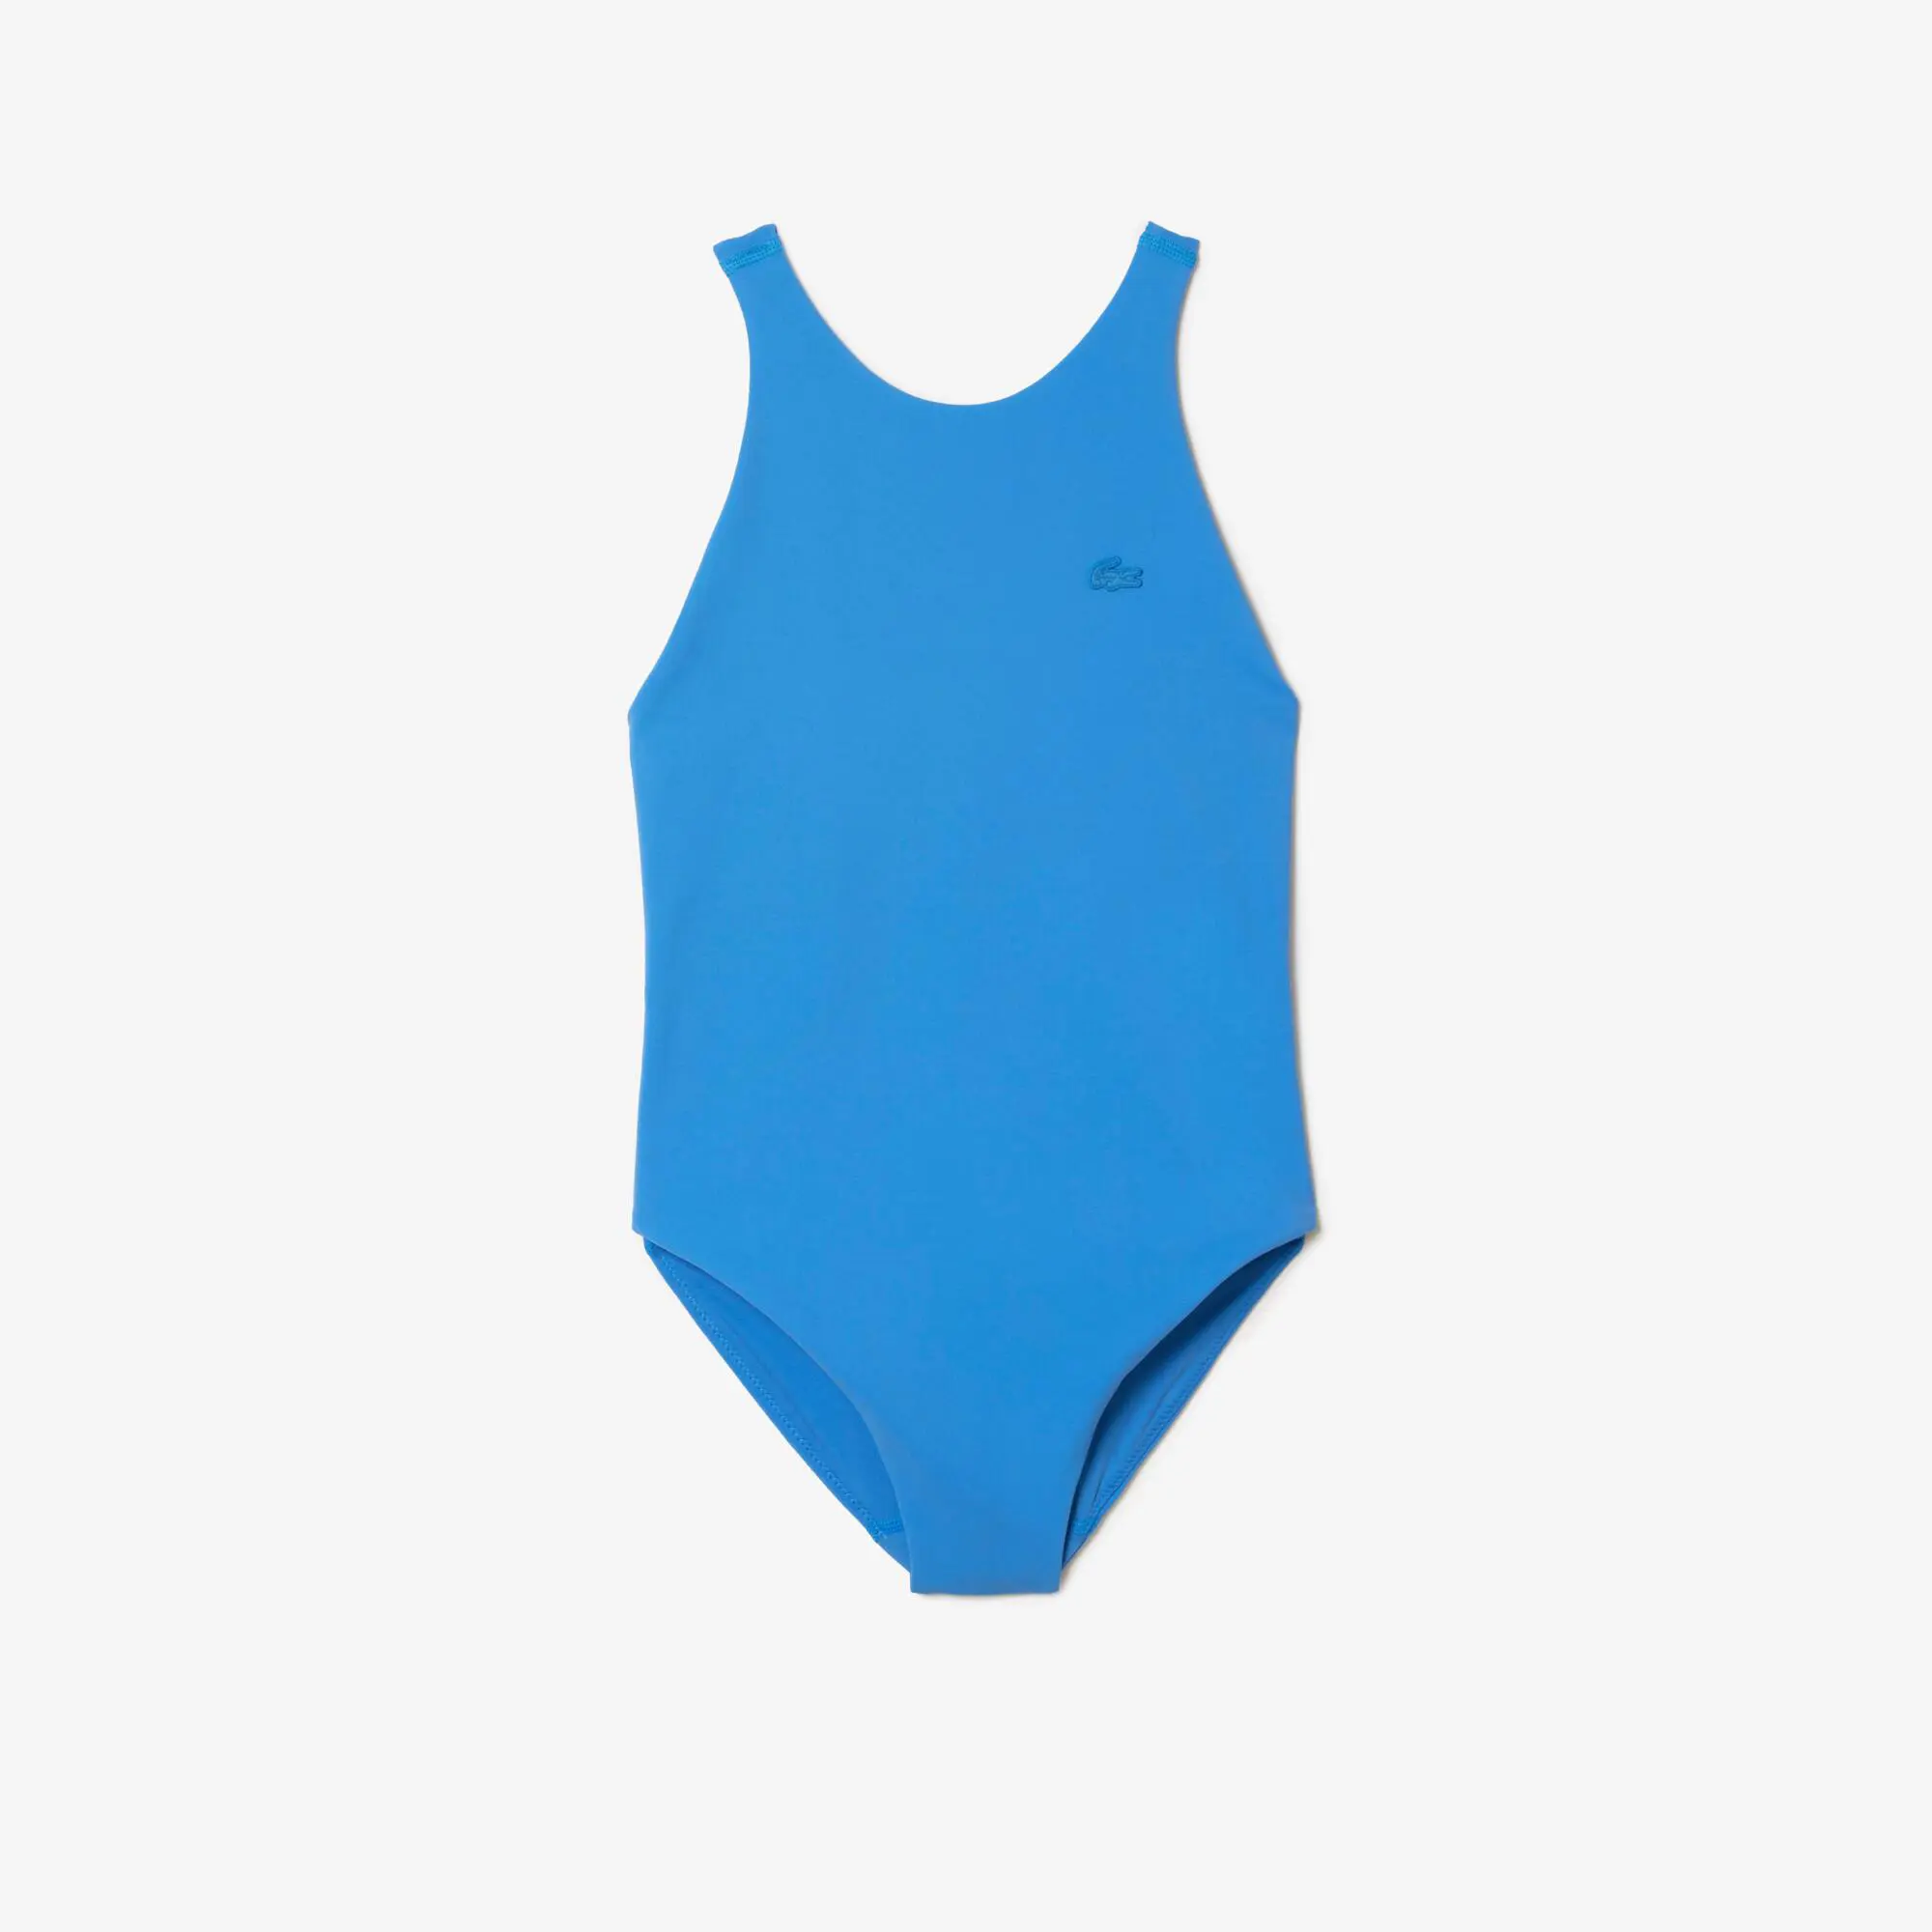 Lacoste Women’s Lacoste One-Piece Recycled Polyamide Swimsuit. 1